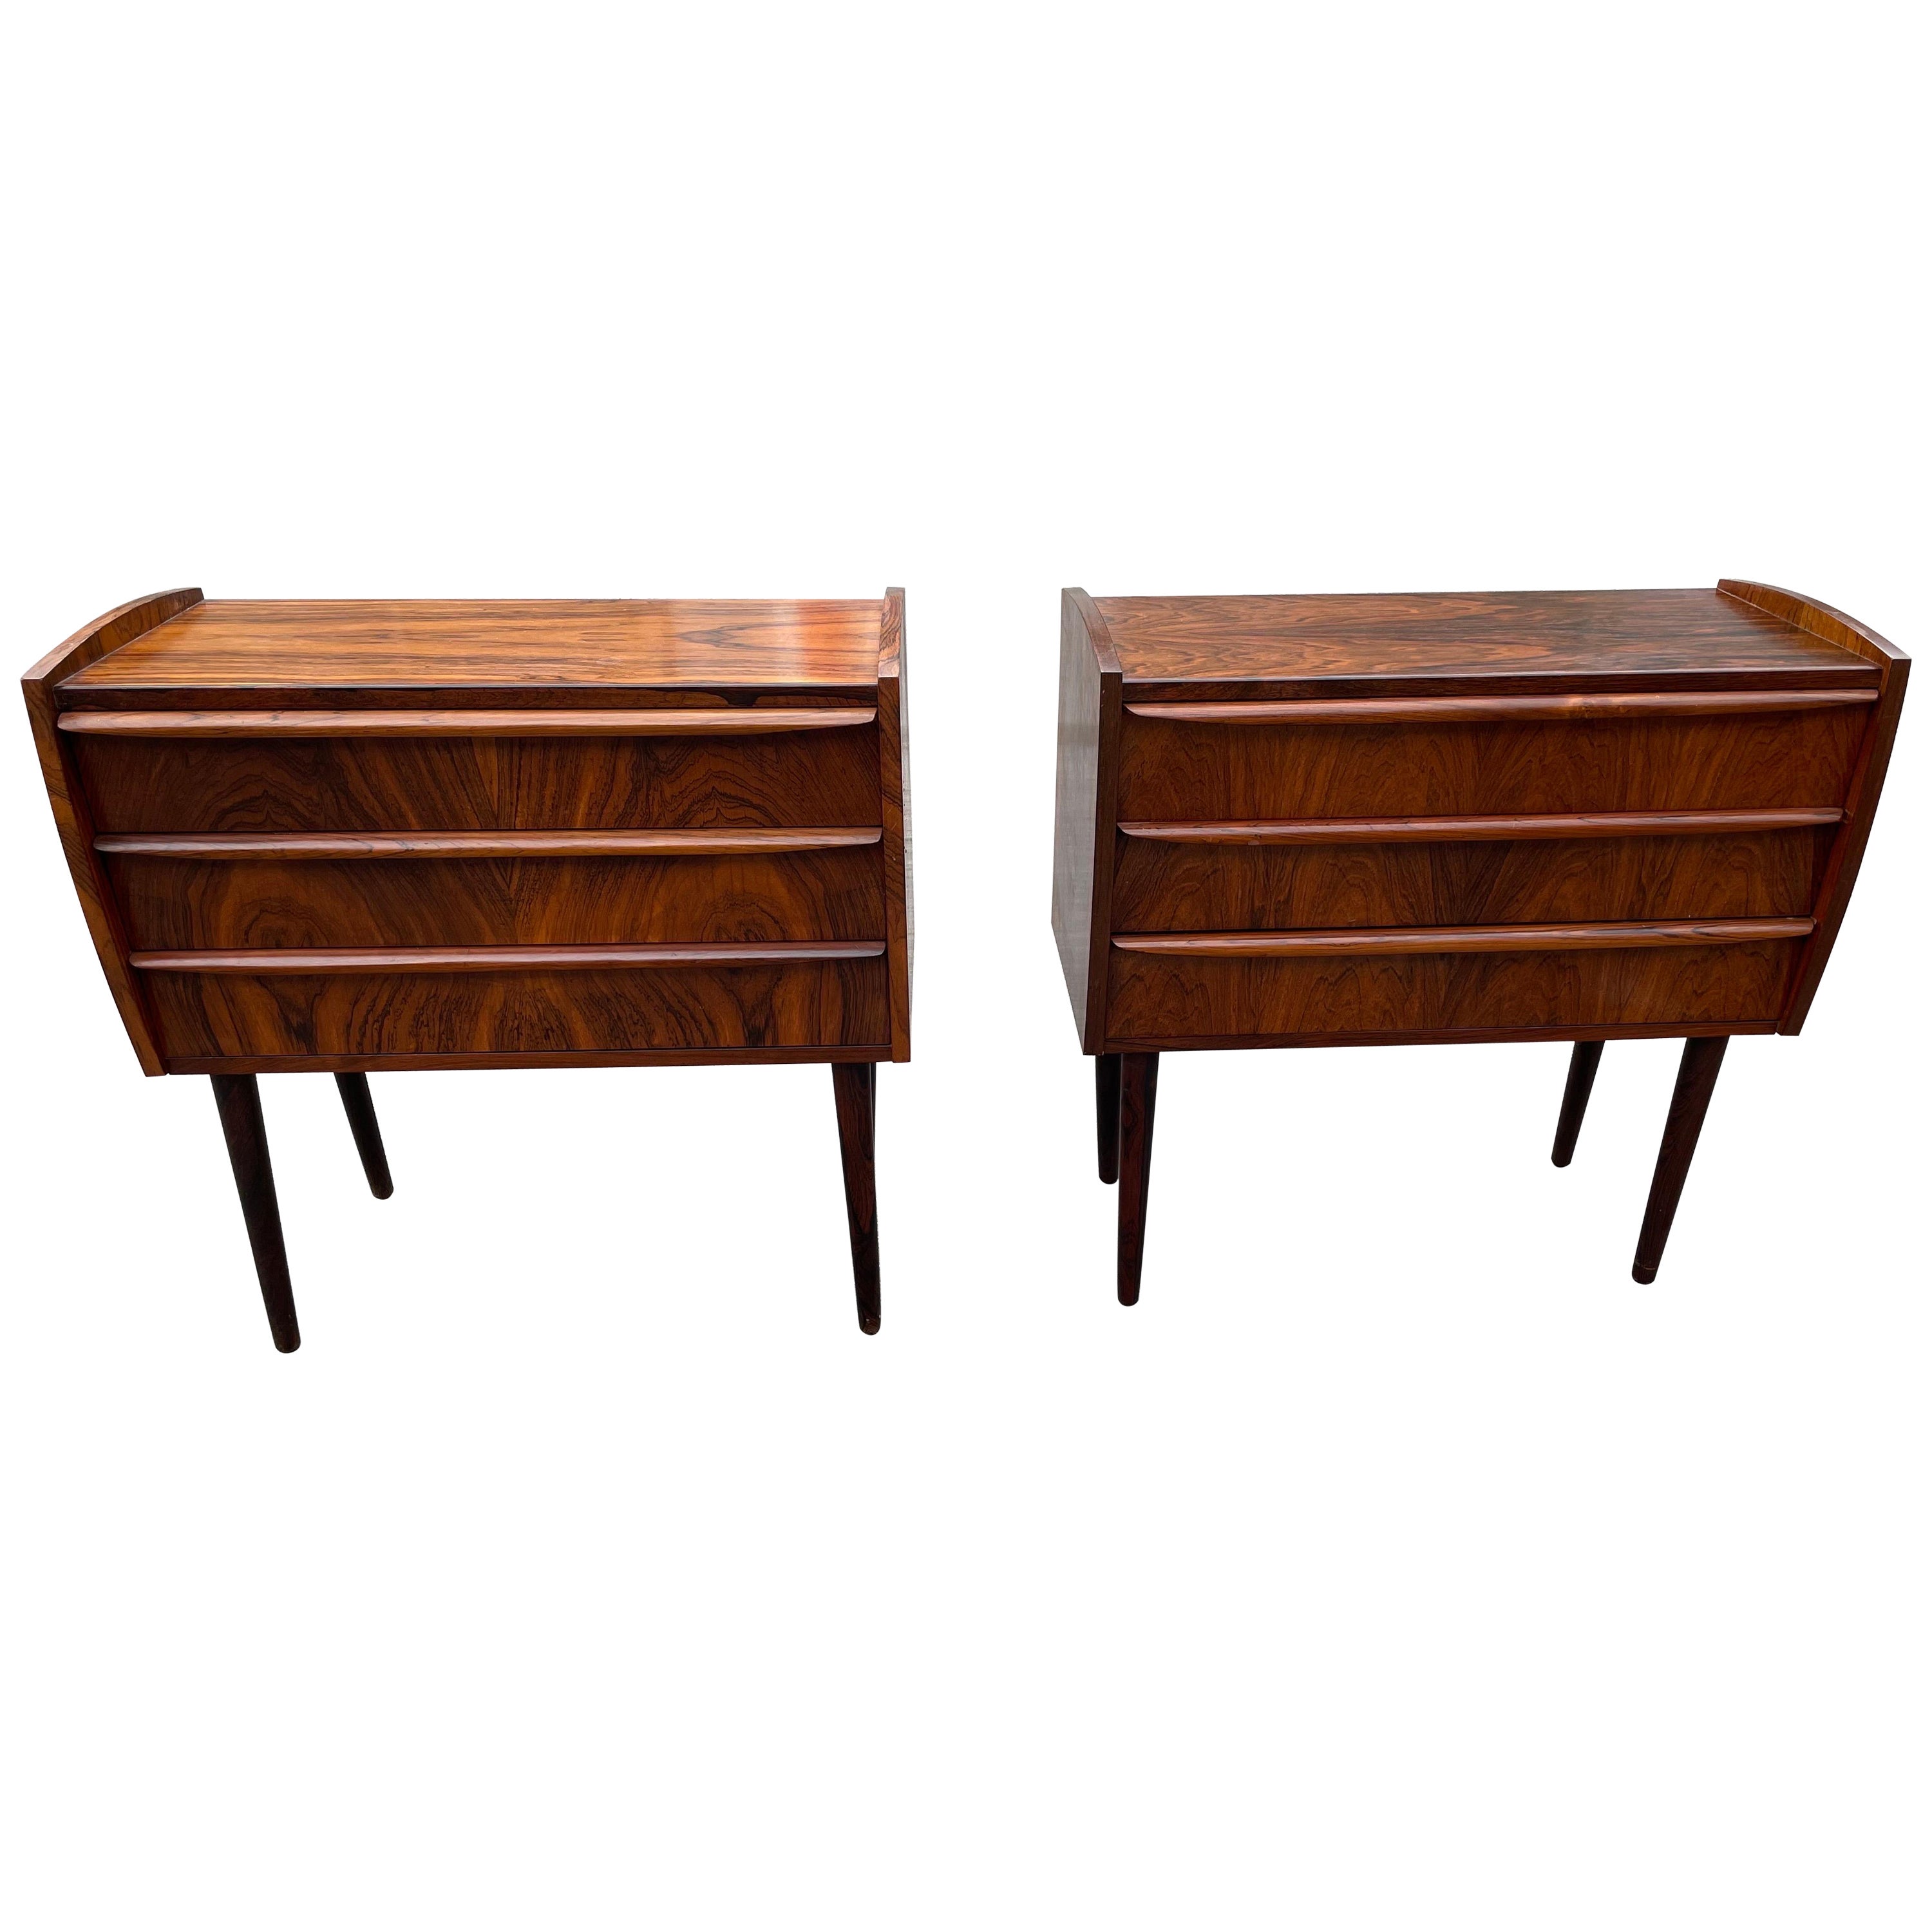 Set of Beautiful Danish Rosewood Nightstands or Dressers from the 1960's For Sale